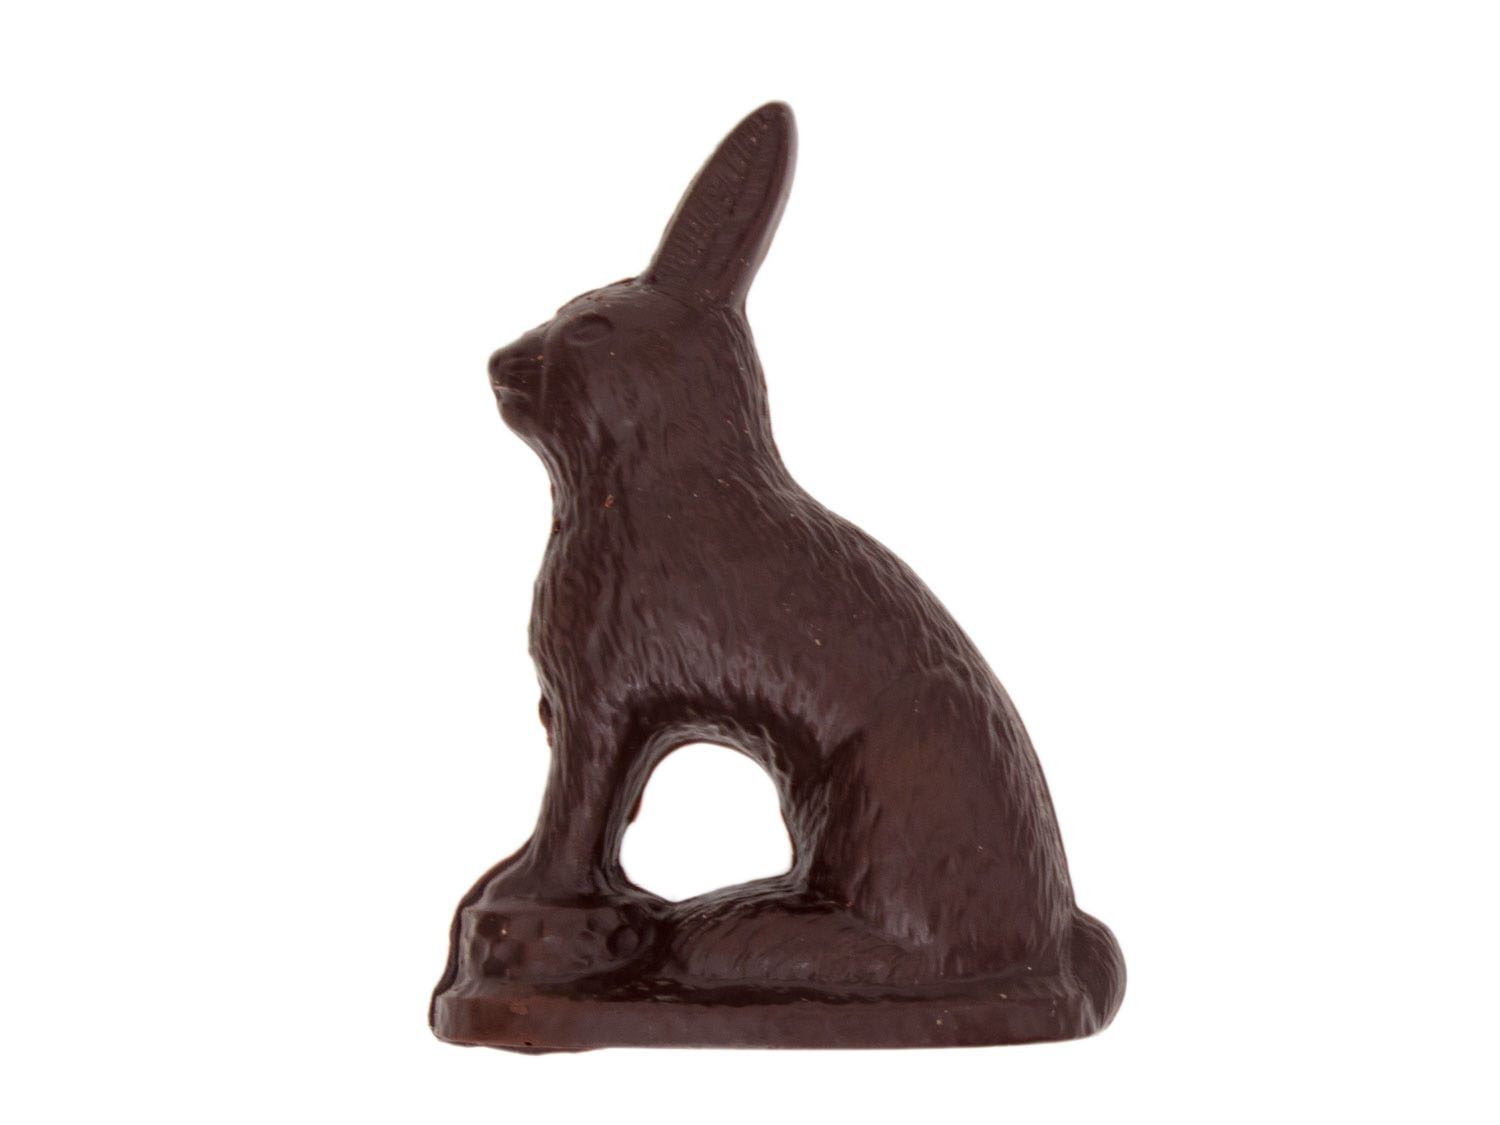 A dark-chocolate Easter bunny from Harbor Sweets